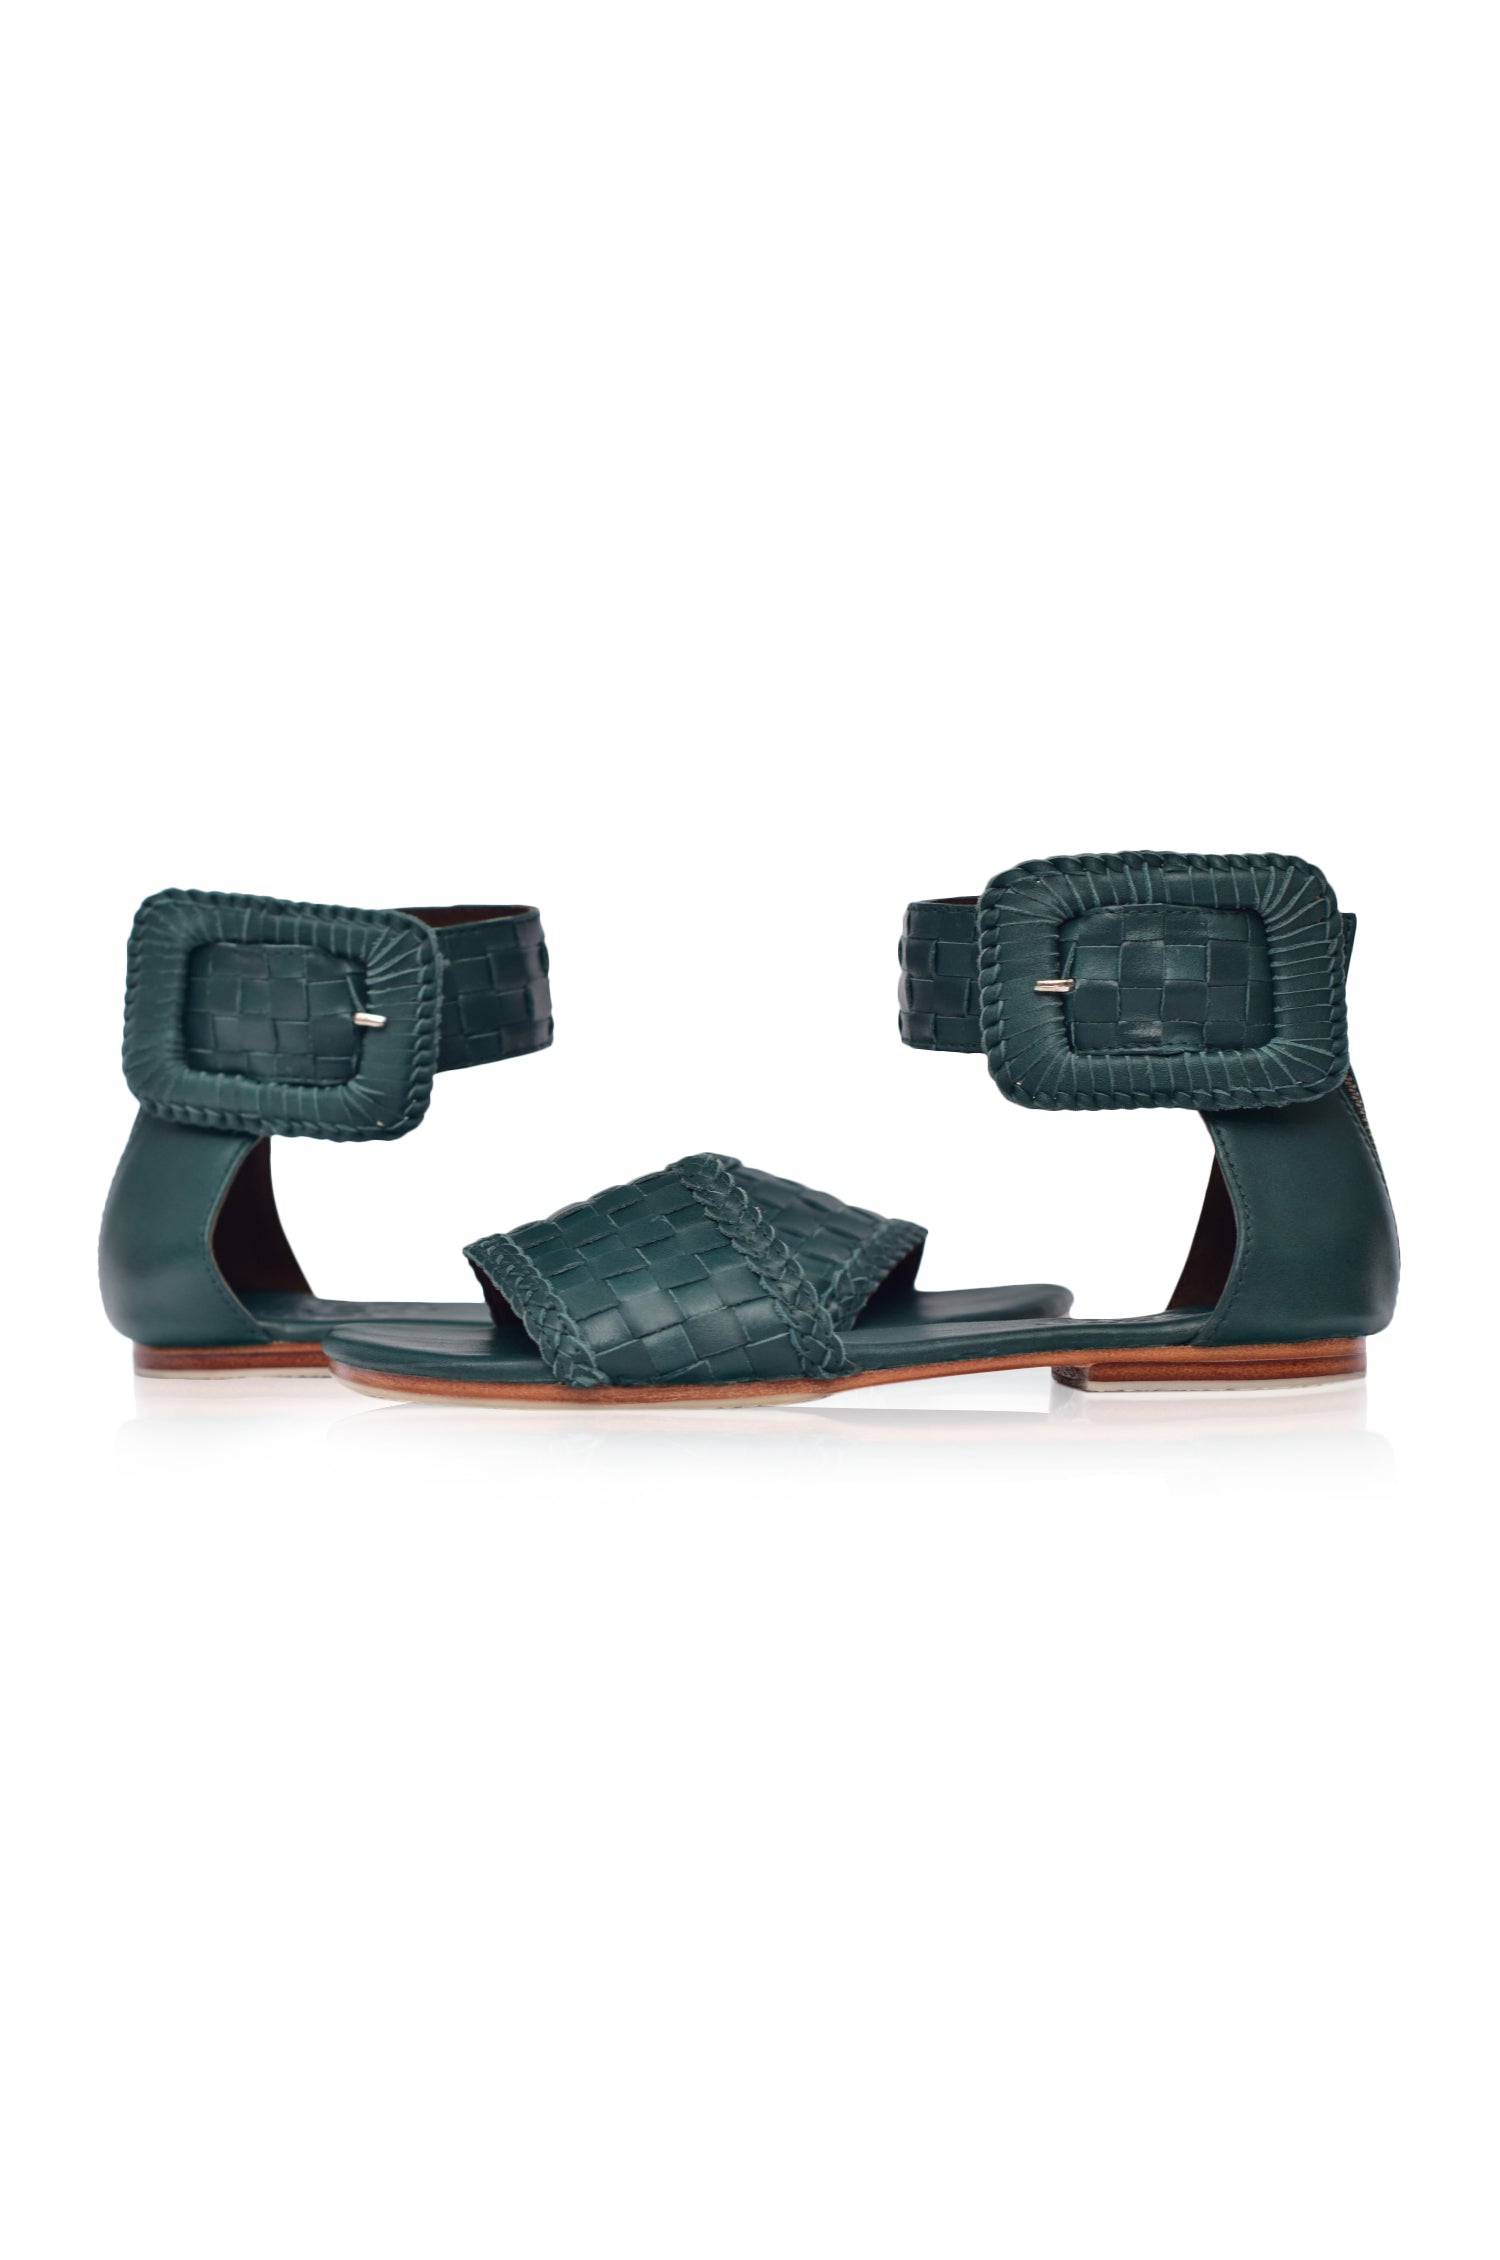 Buy Madagascar Woven Leather Sandals by ELF